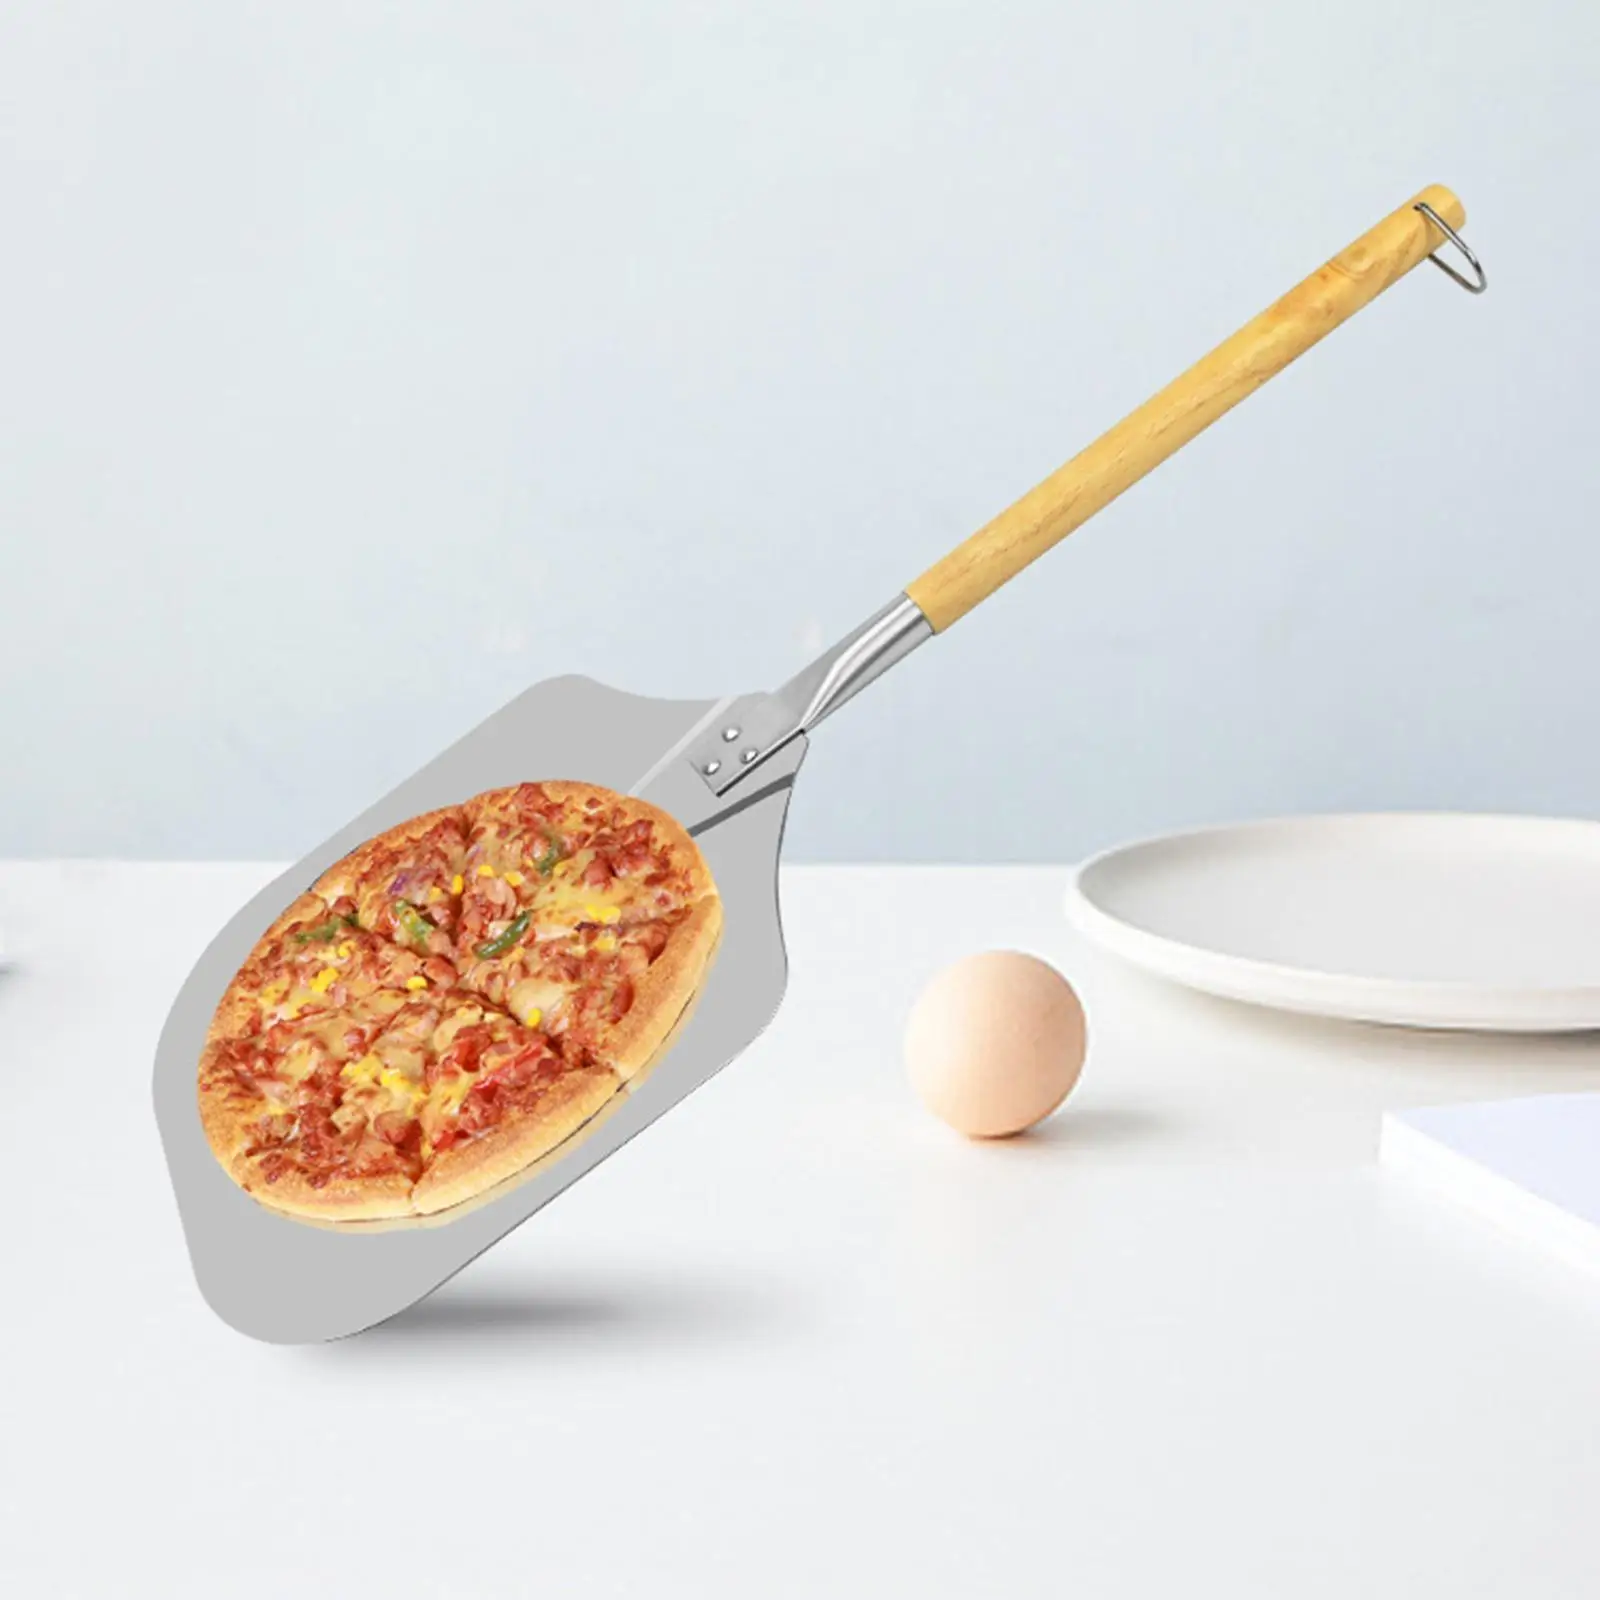 Multifunction Stainless Steel Pizza Peel Detachable Handle Pizza Shovel Kitchen Baking Tools Oven or Grill Use for Bread Pastry